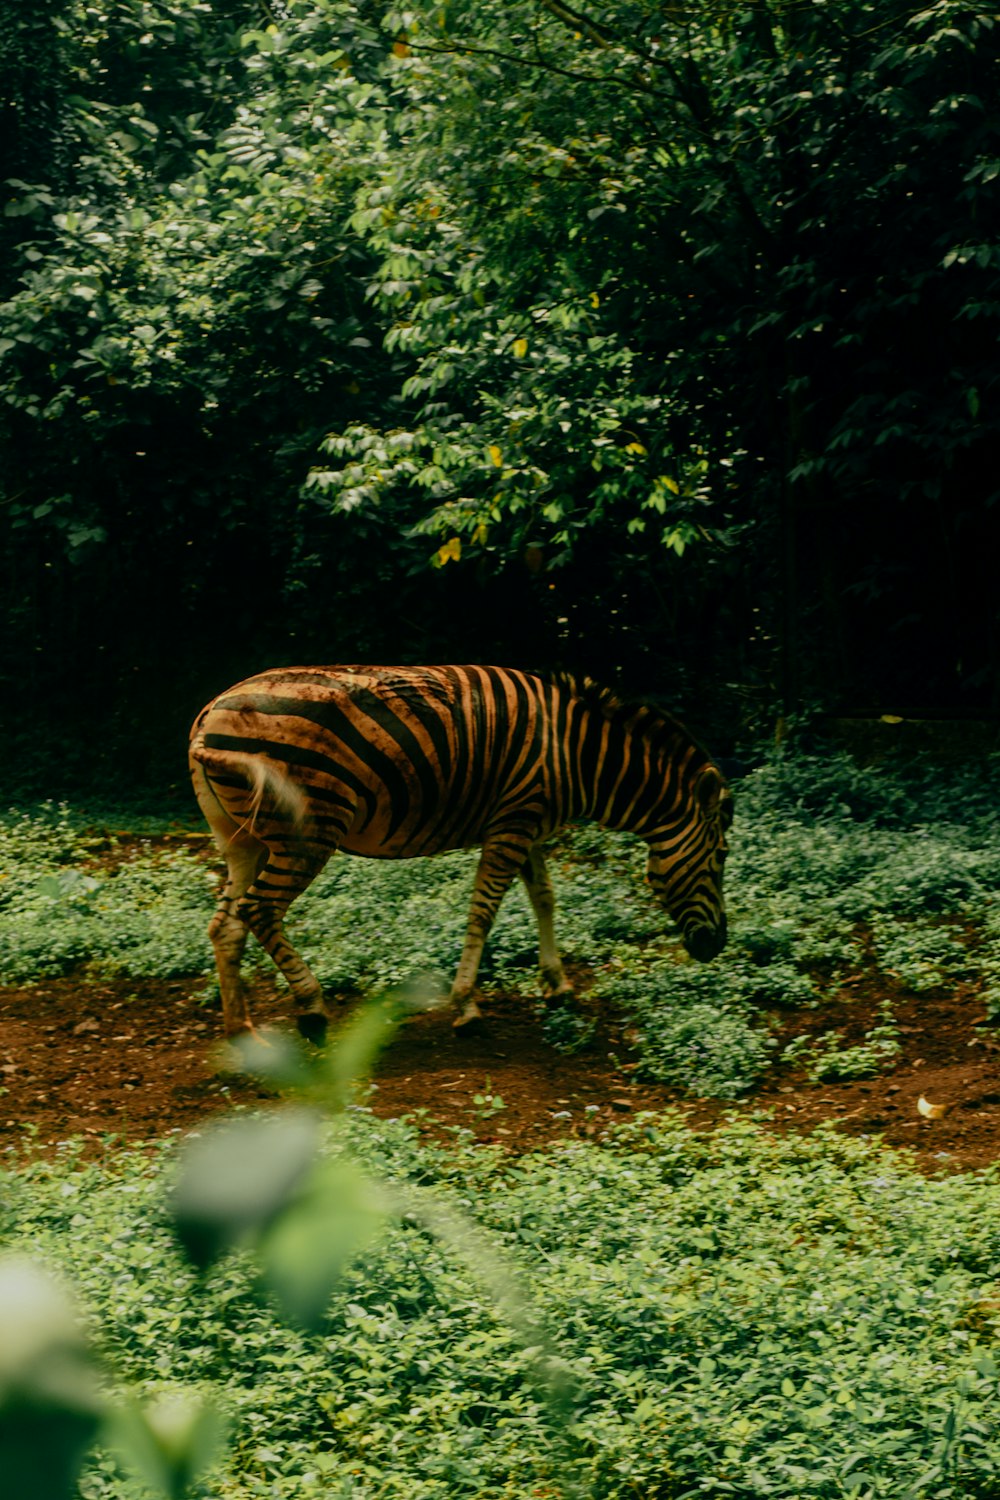 a zebra standing on top of a lush green field